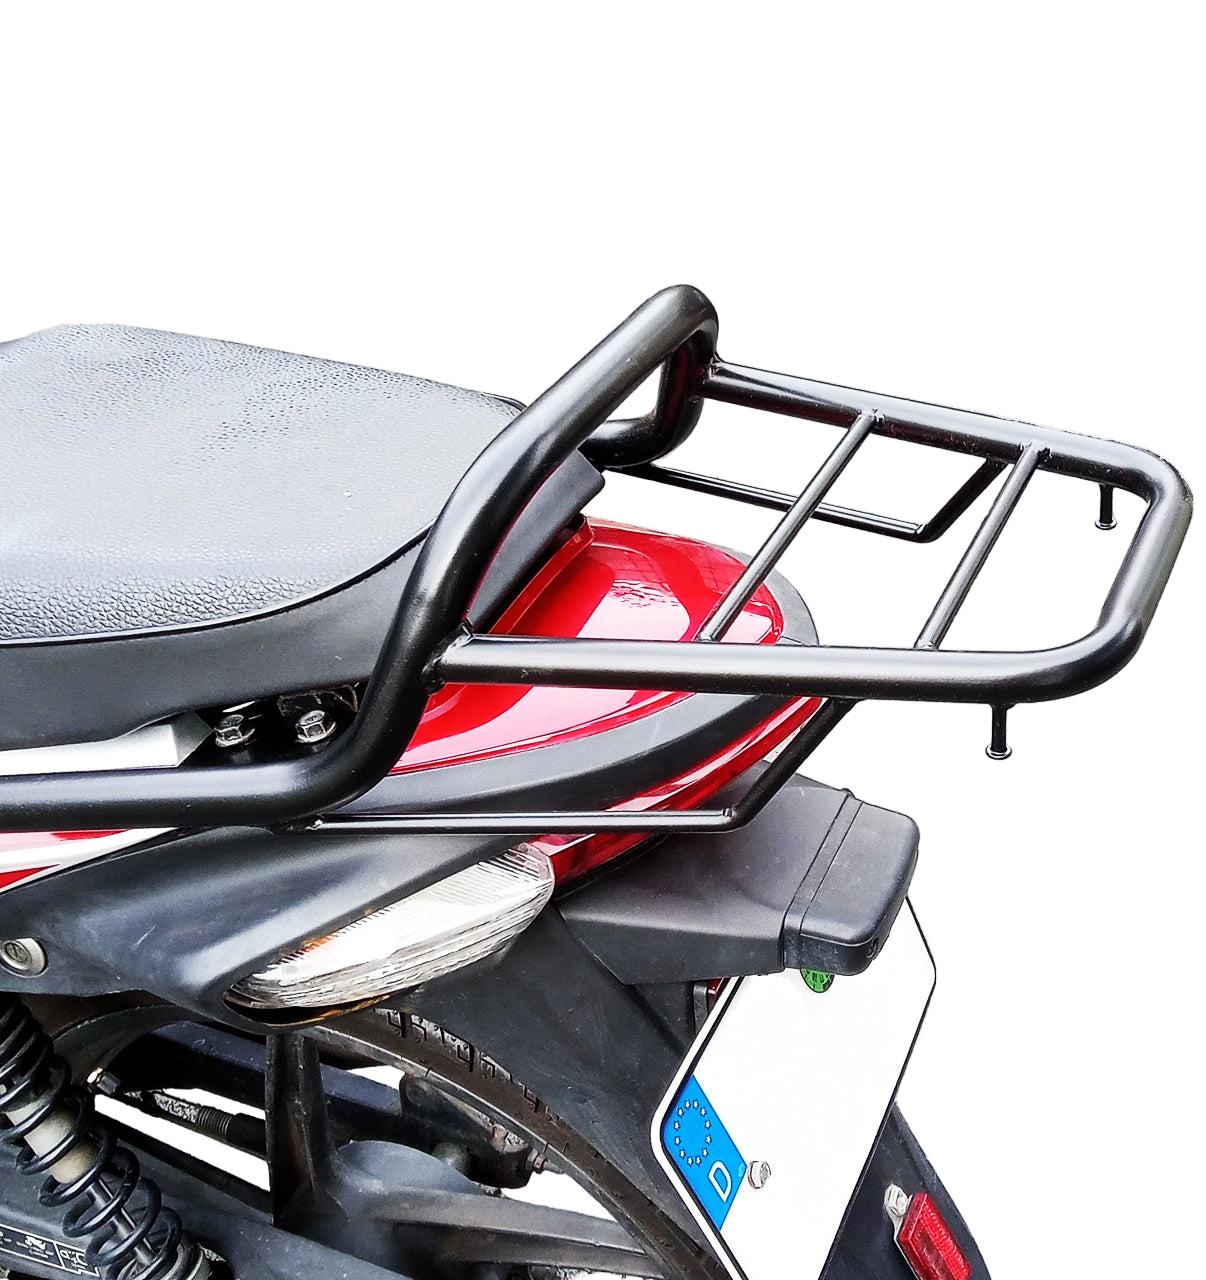 Honda Wave 110 AFS 110I rear + middle center rack pair luggage carrier set